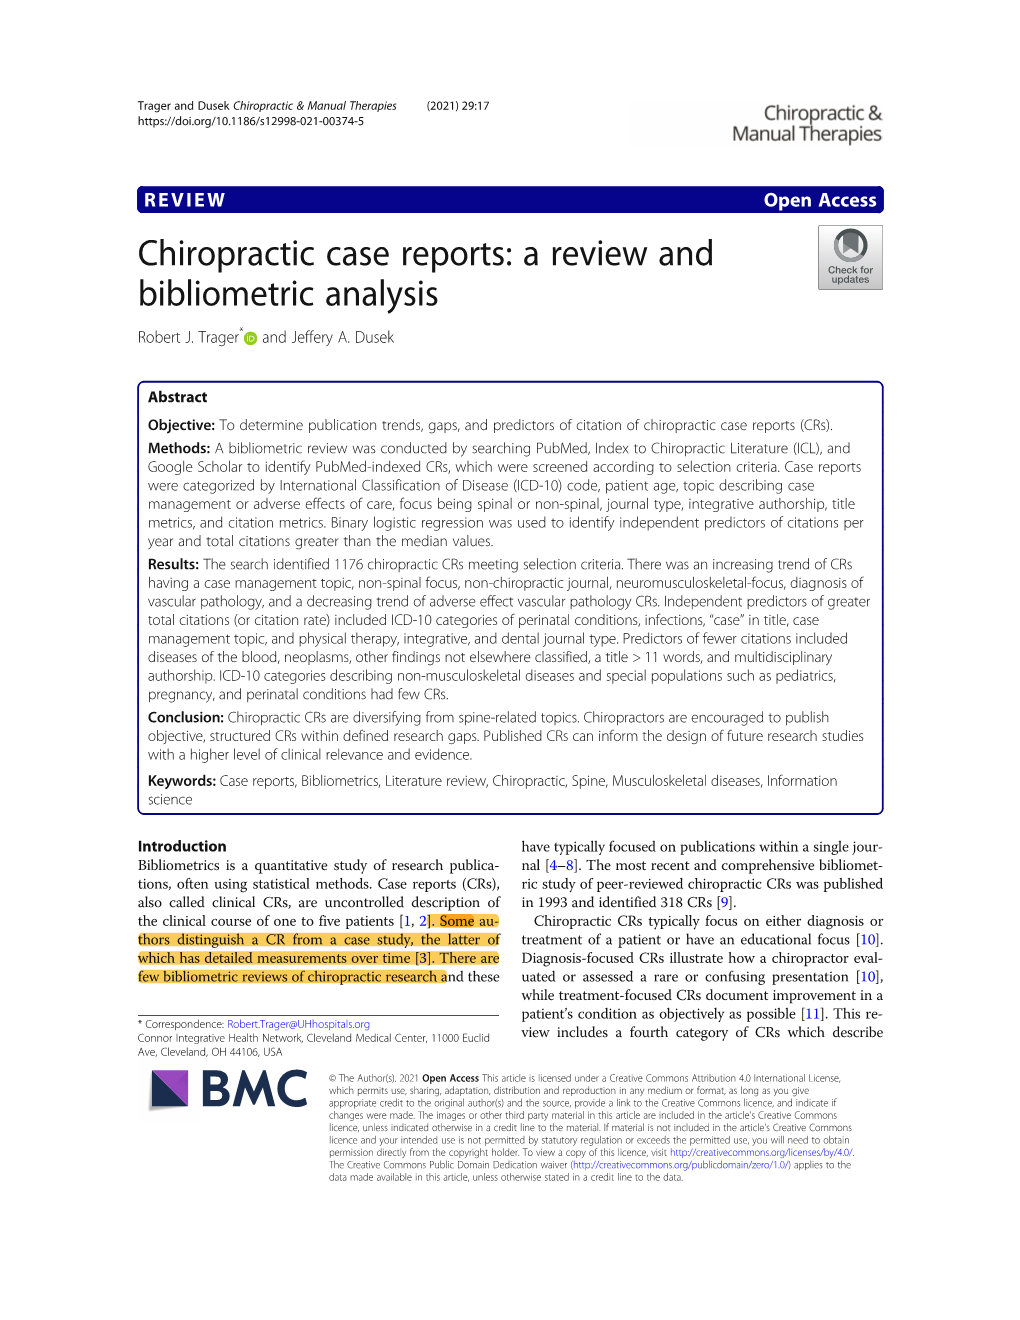 Chiropractic Case Reports: a Review and Bibliometric Analysis Robert J